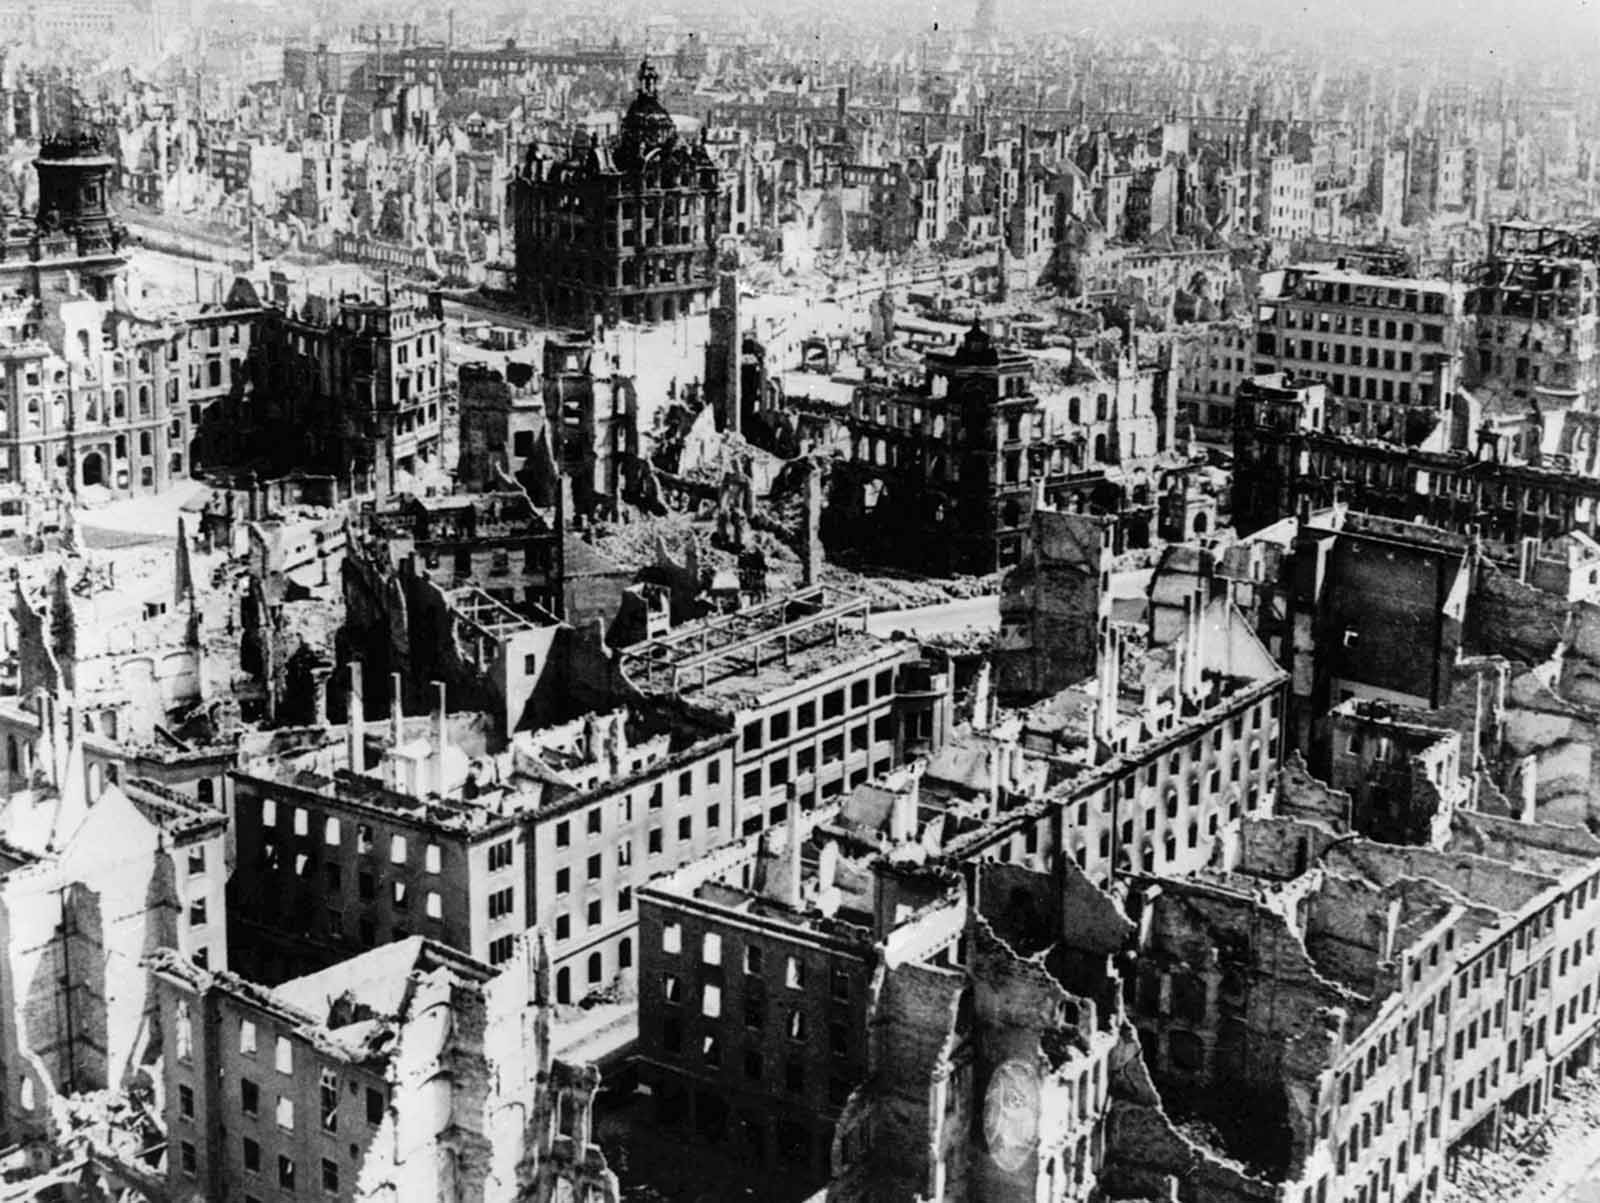 The demolished city of Dresden.